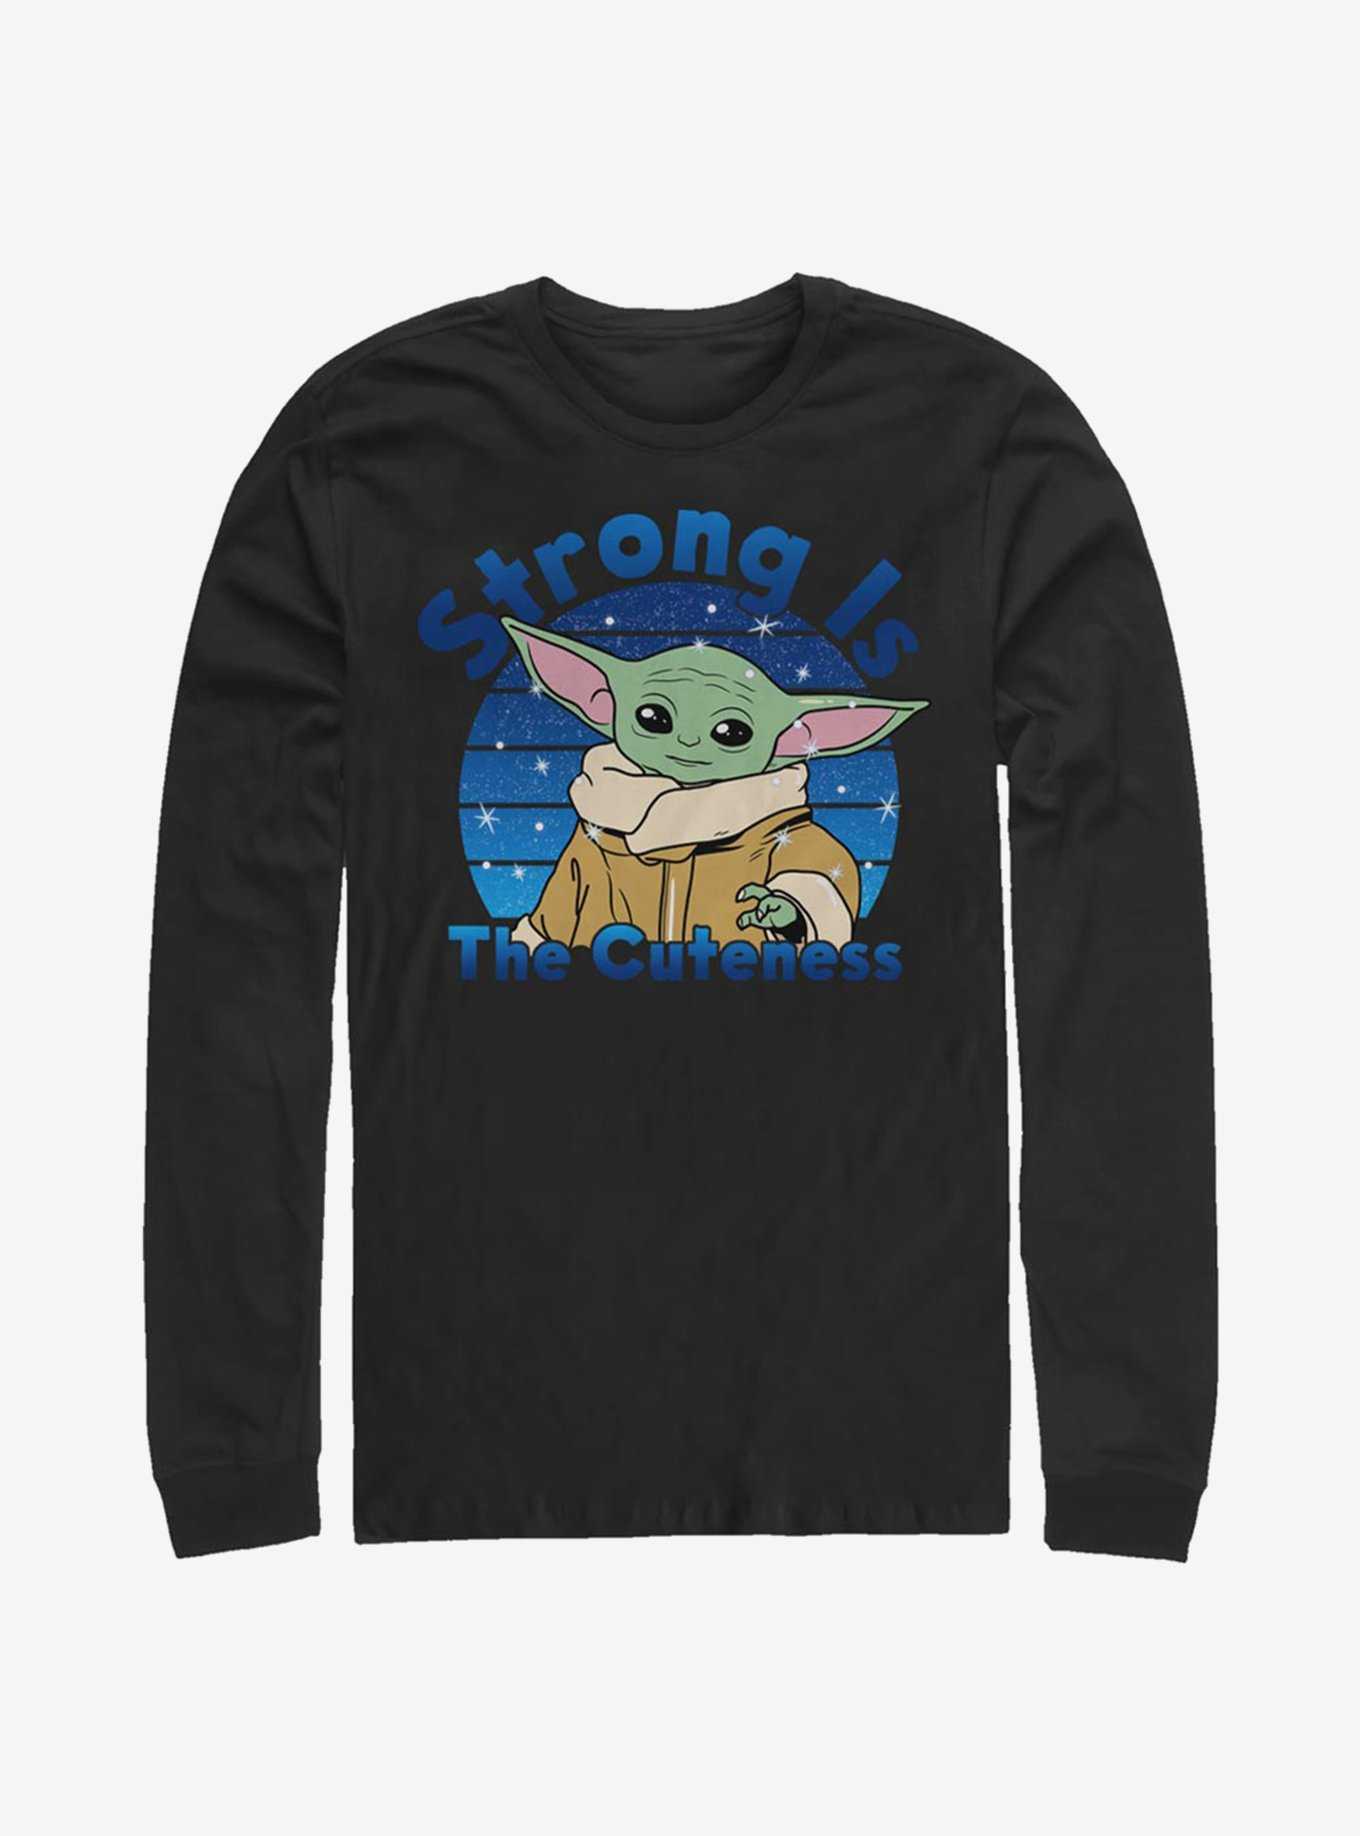 Star Wars The Mandalorian The Child Strong Is The Cuteness Long-Sleeve T-Shirt, , hi-res